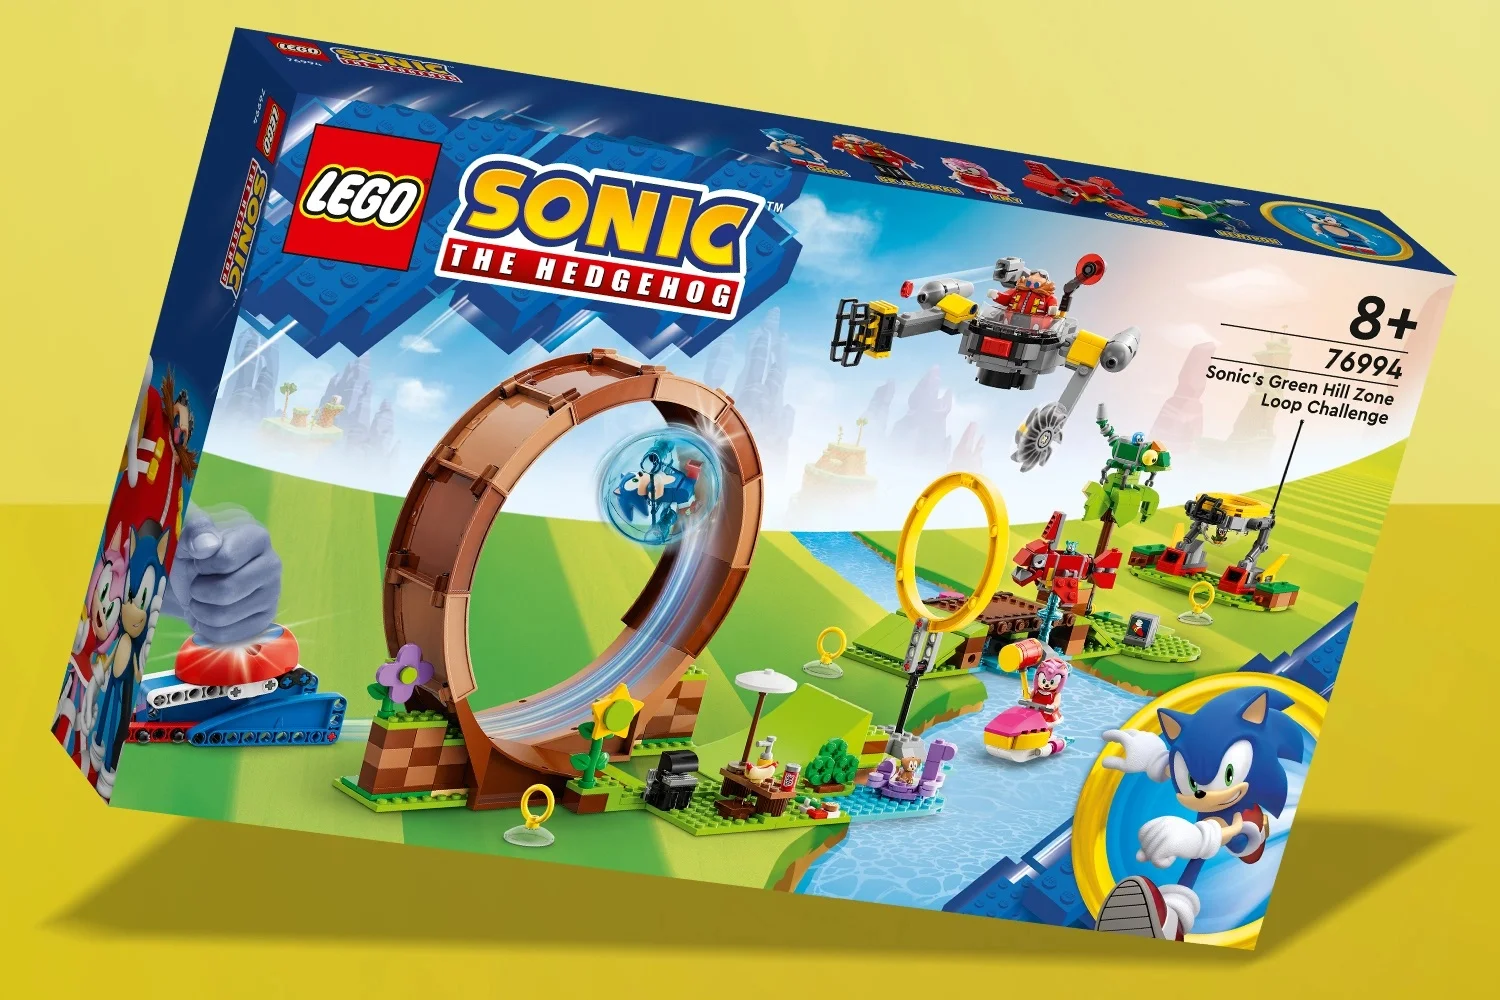 Lego is preparing to release four sets dedicated to the Sonic franchise